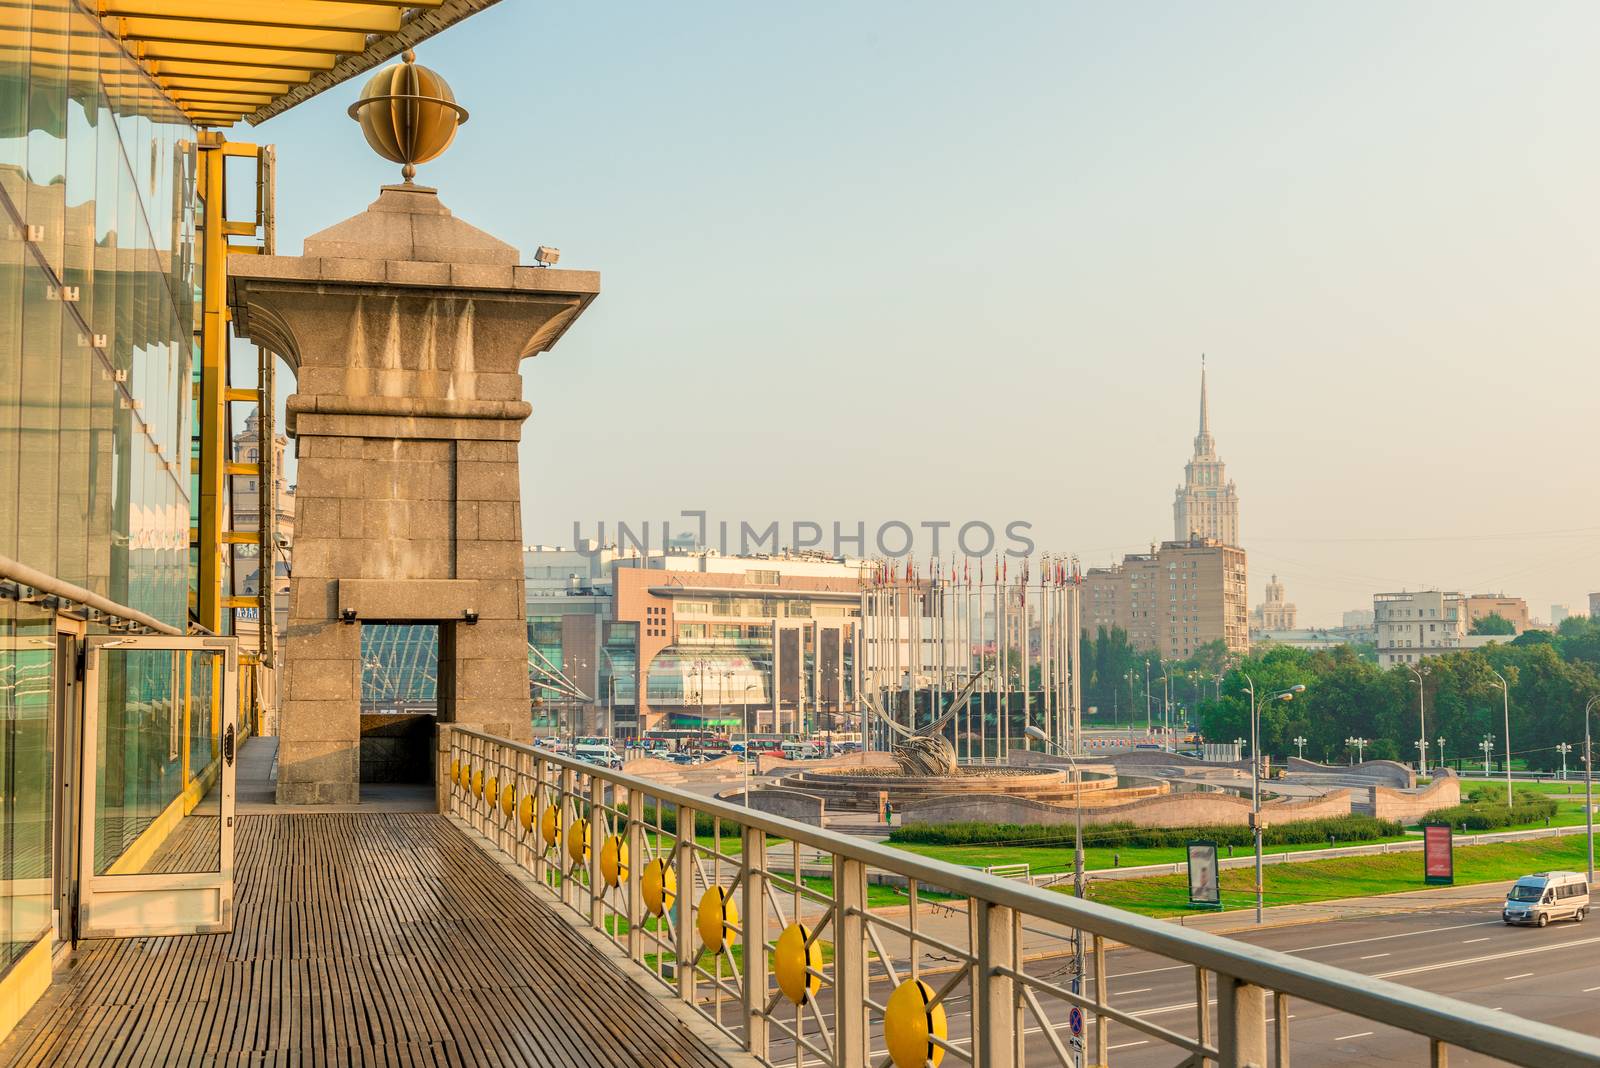 Pedestrian bridge over the highway at the Kazan station in Moscow